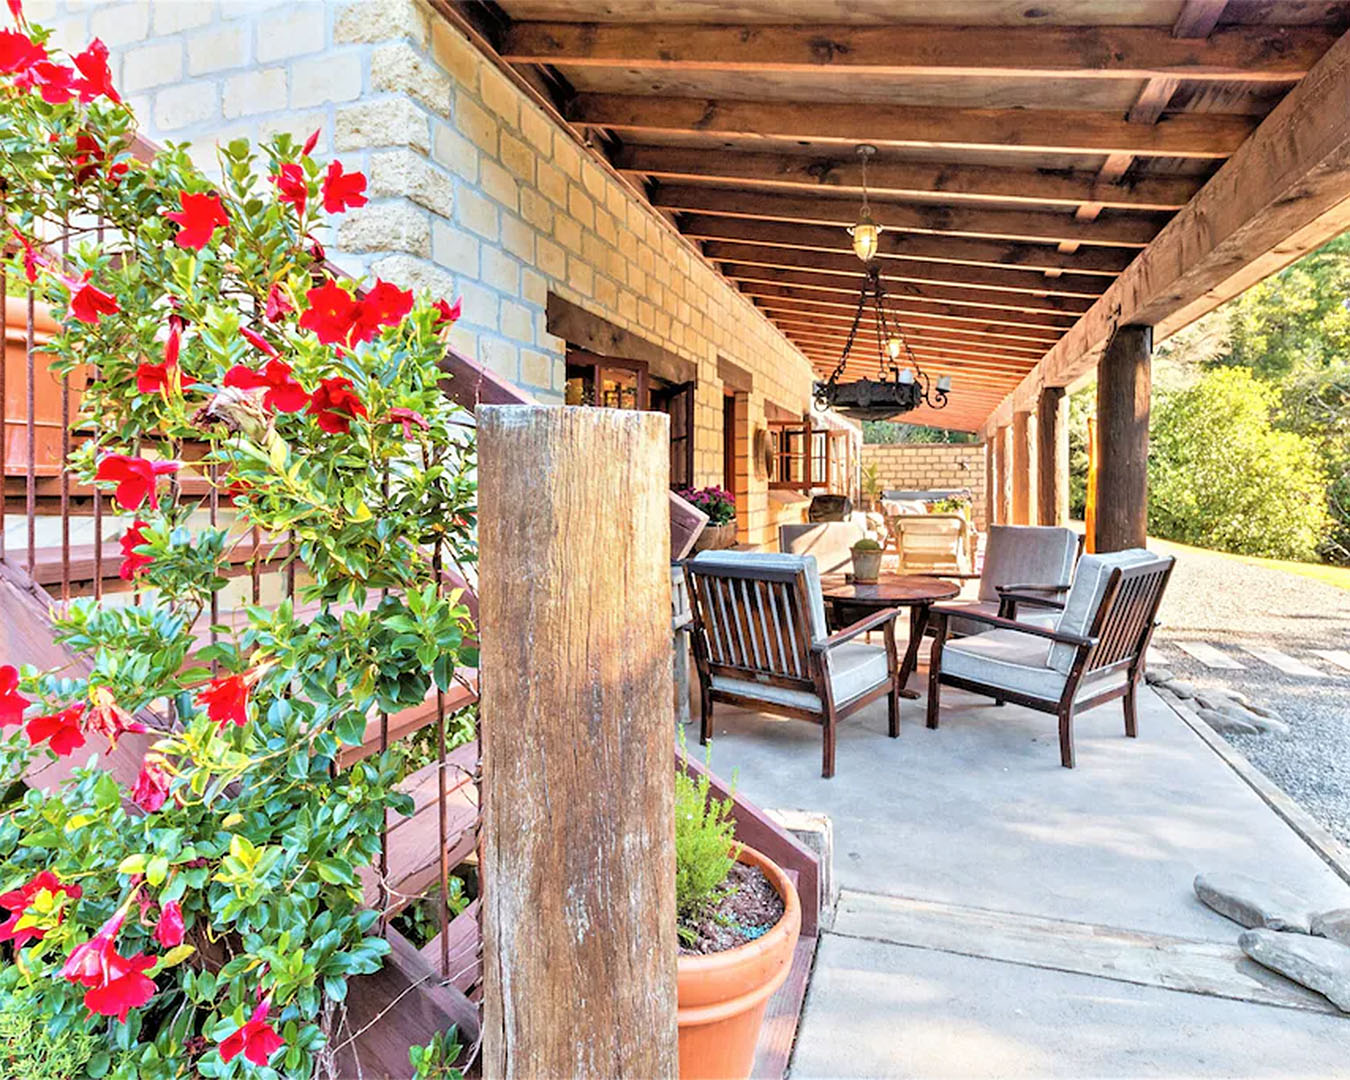 Villa Casa Maria showing an outdoor Tuscan vibe with wooden beams, chairs and an abundance of flowers.